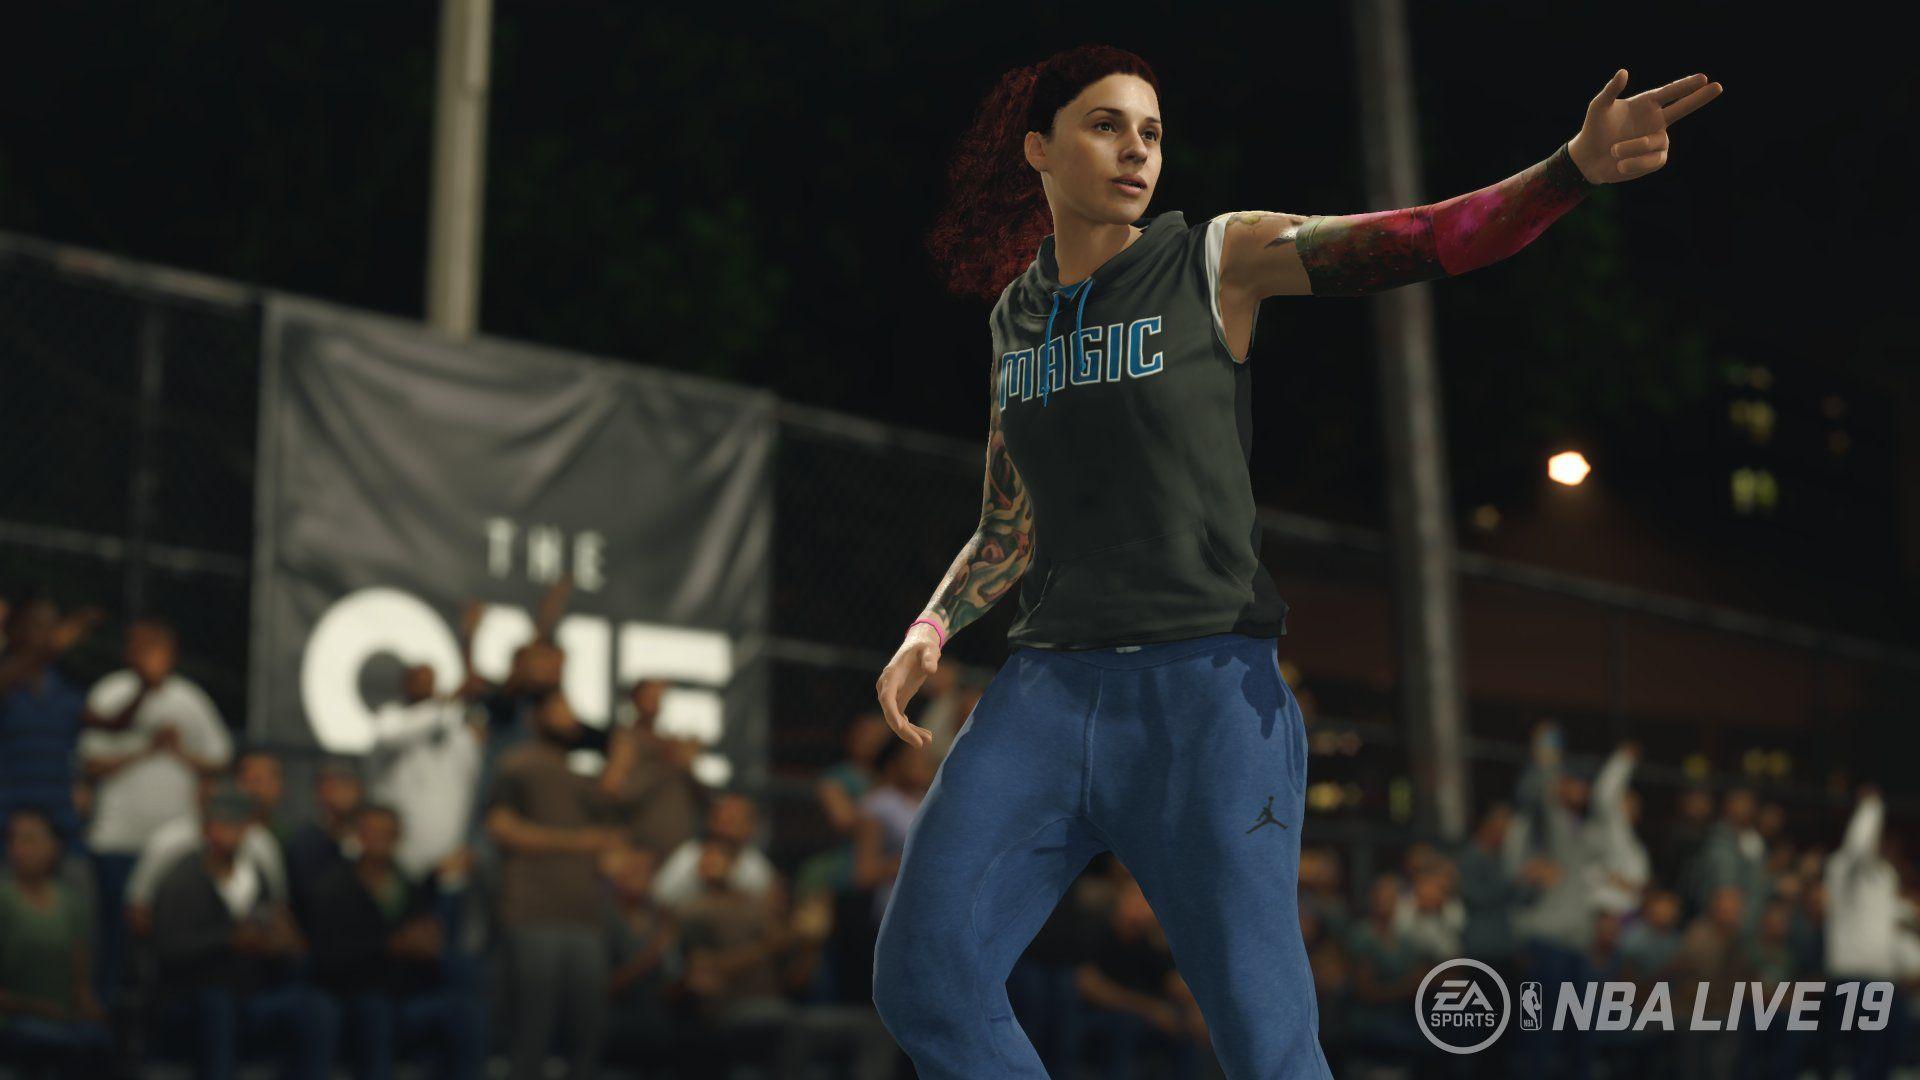 NBA Live 19 features the option to create a female player, demo